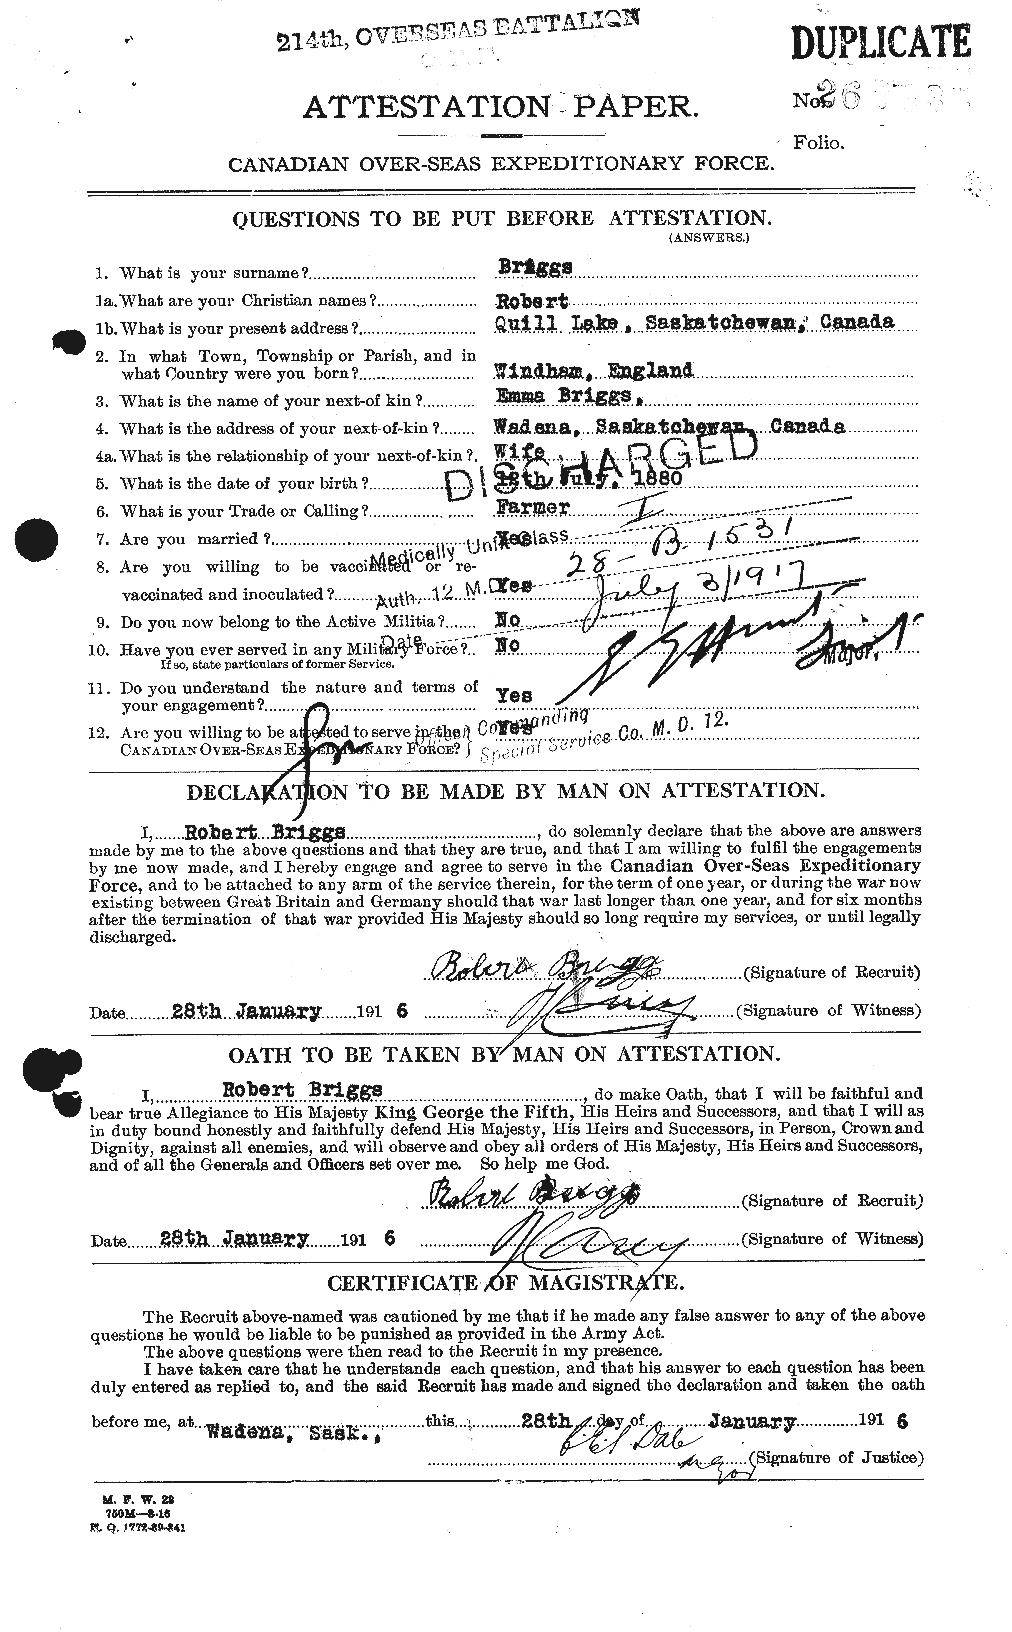 Personnel Records of the First World War - CEF 264089a